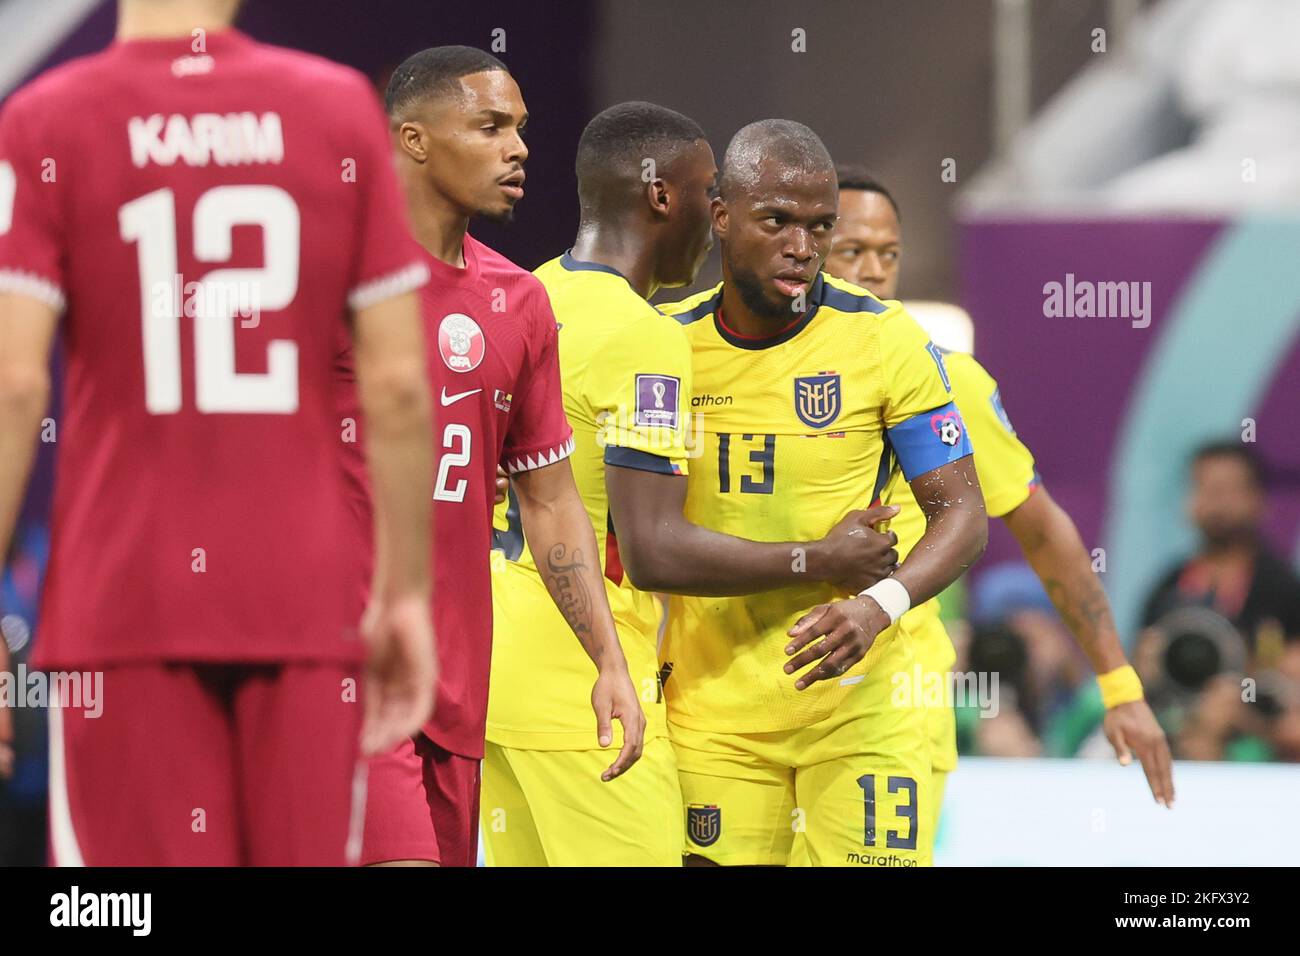 Al Khor, Qatar. 20th Nov, 2022. Ecuador's Enner Valencia celebrates after scoring during a soccer game between Qatar and Ecuador, the opening match of the 2022 FIFA World Cup soccer in Al Khor, State of Qatar on Sunday 20 November 2022. The World Cup is taking place from 20 November to 18 December. BELGA PHOTO BRUNO FAHY Credit: Belga News Agency/Alamy Live News Stock Photo